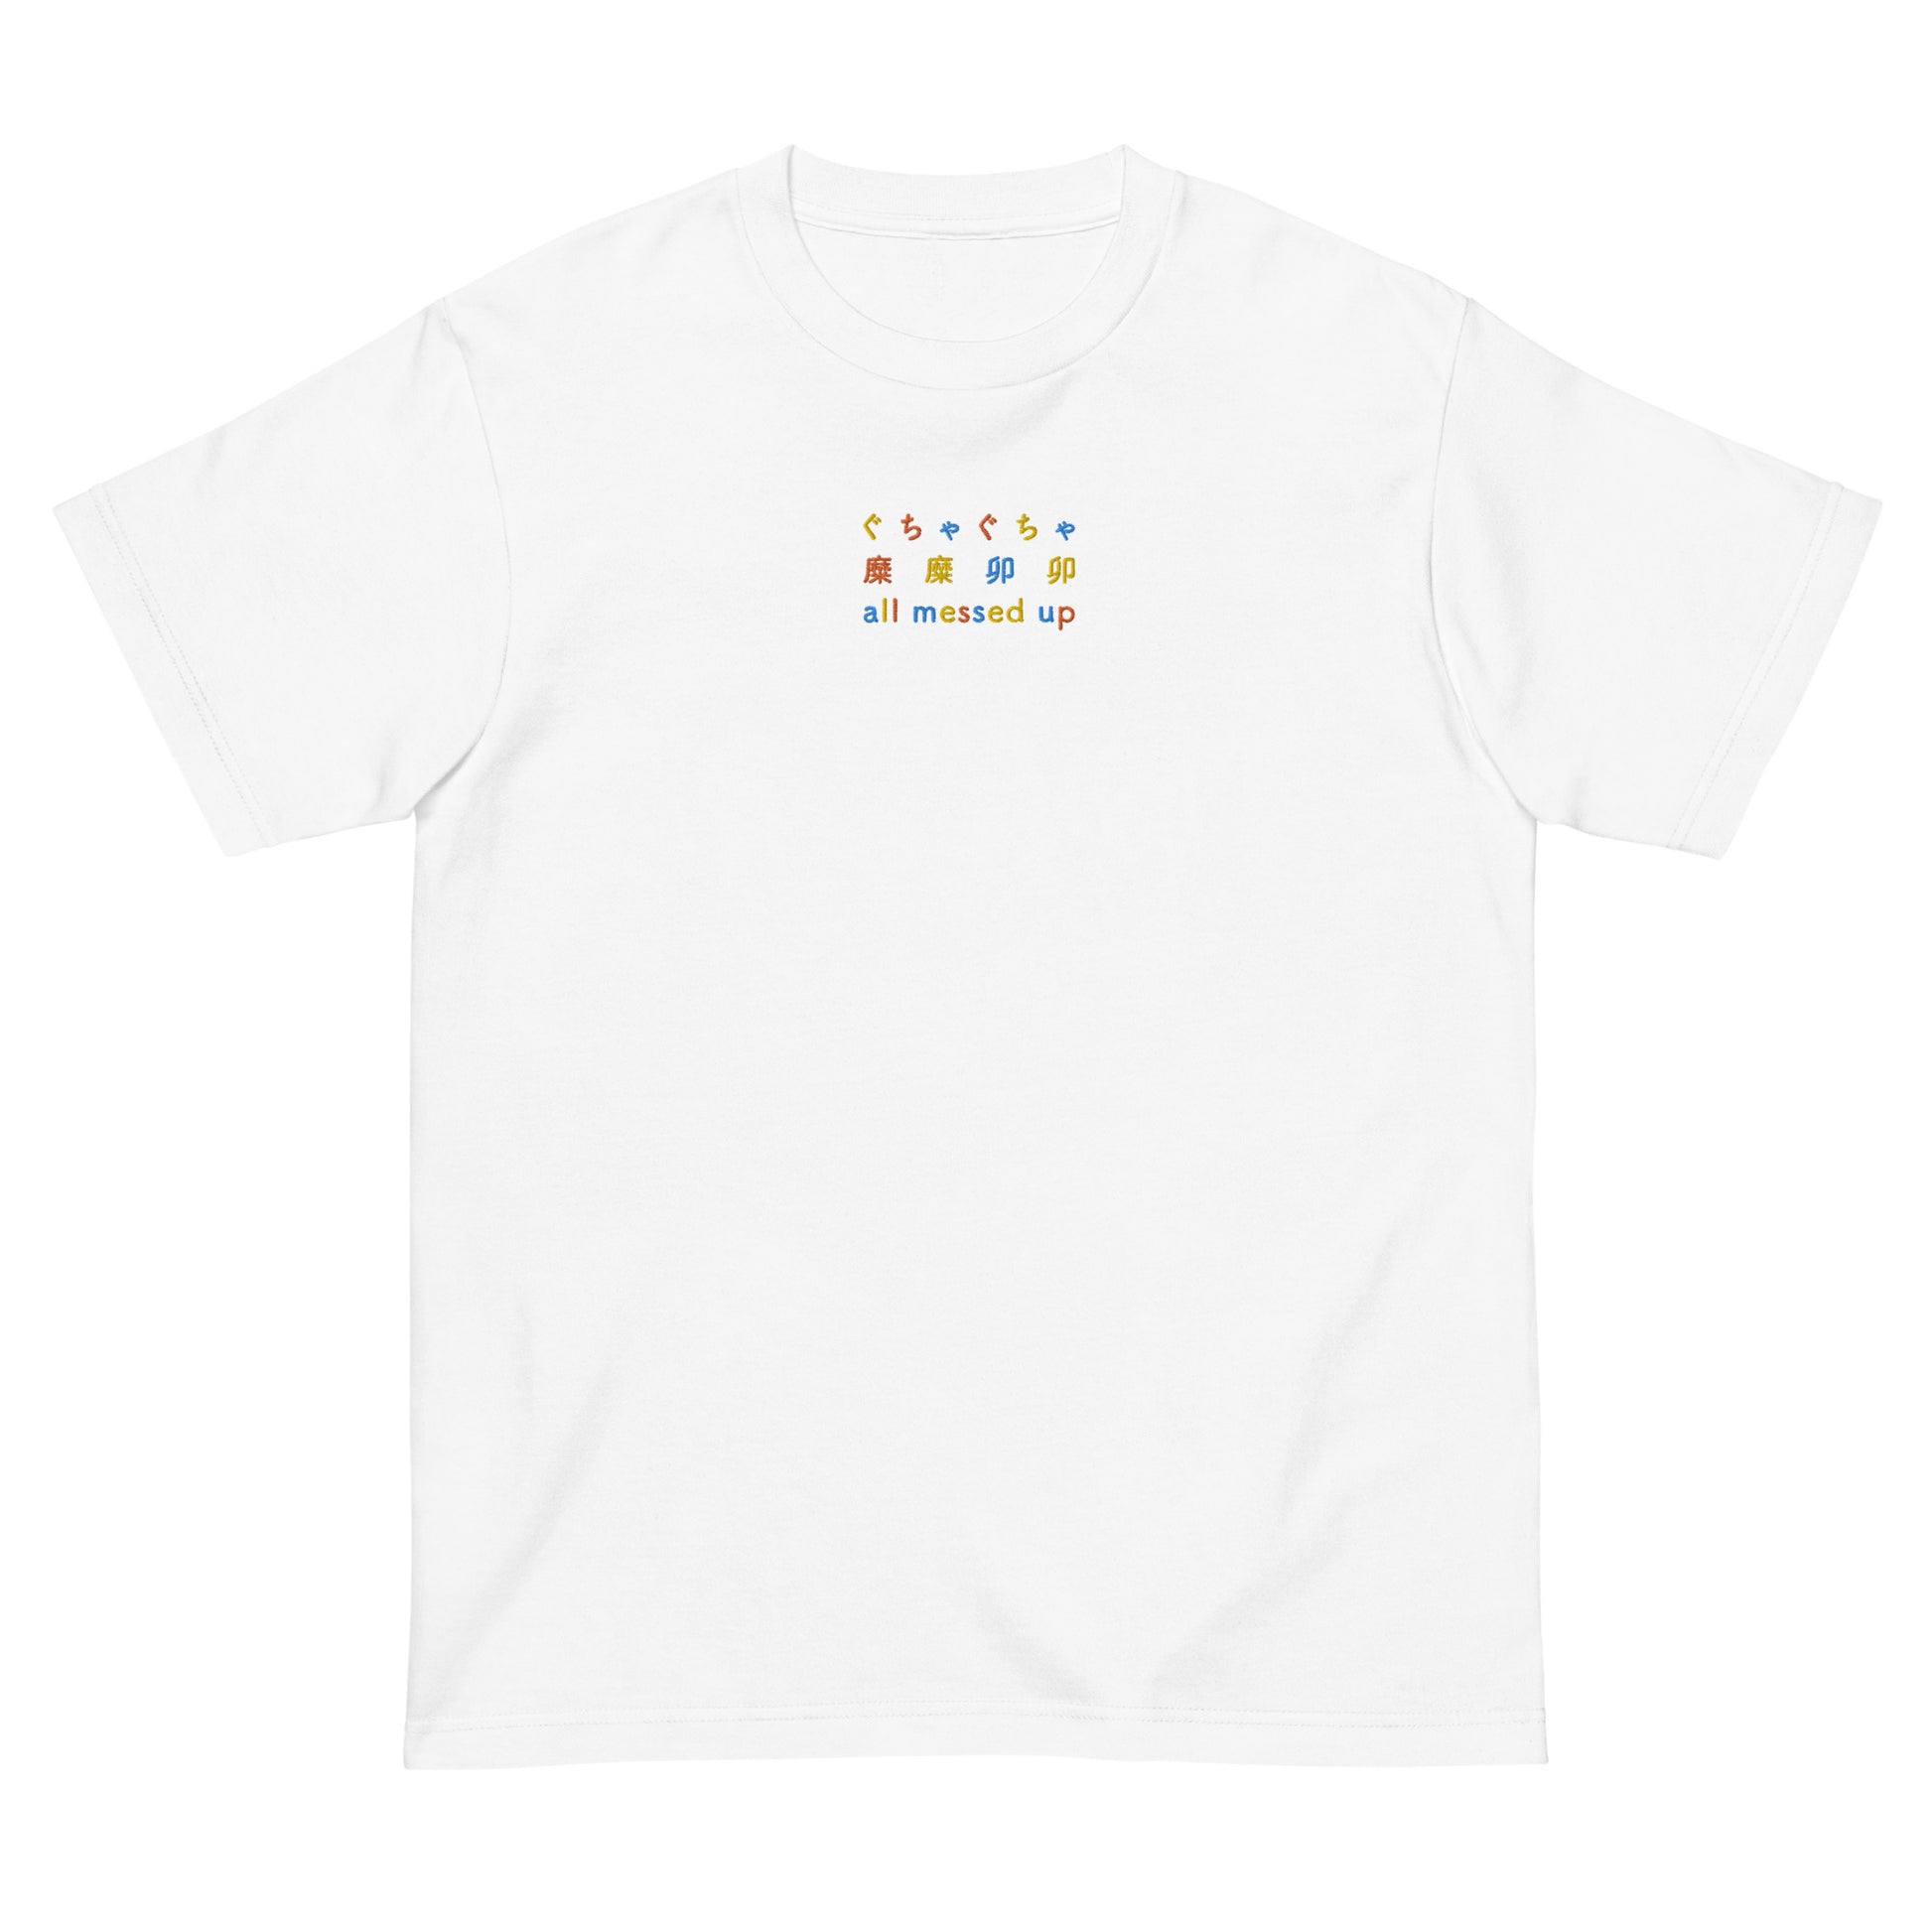 White High Quality Tee - Front Design with an Yellow,Orange,Blue Embroidery "All Messed Up" in Japanese,Chinese and English